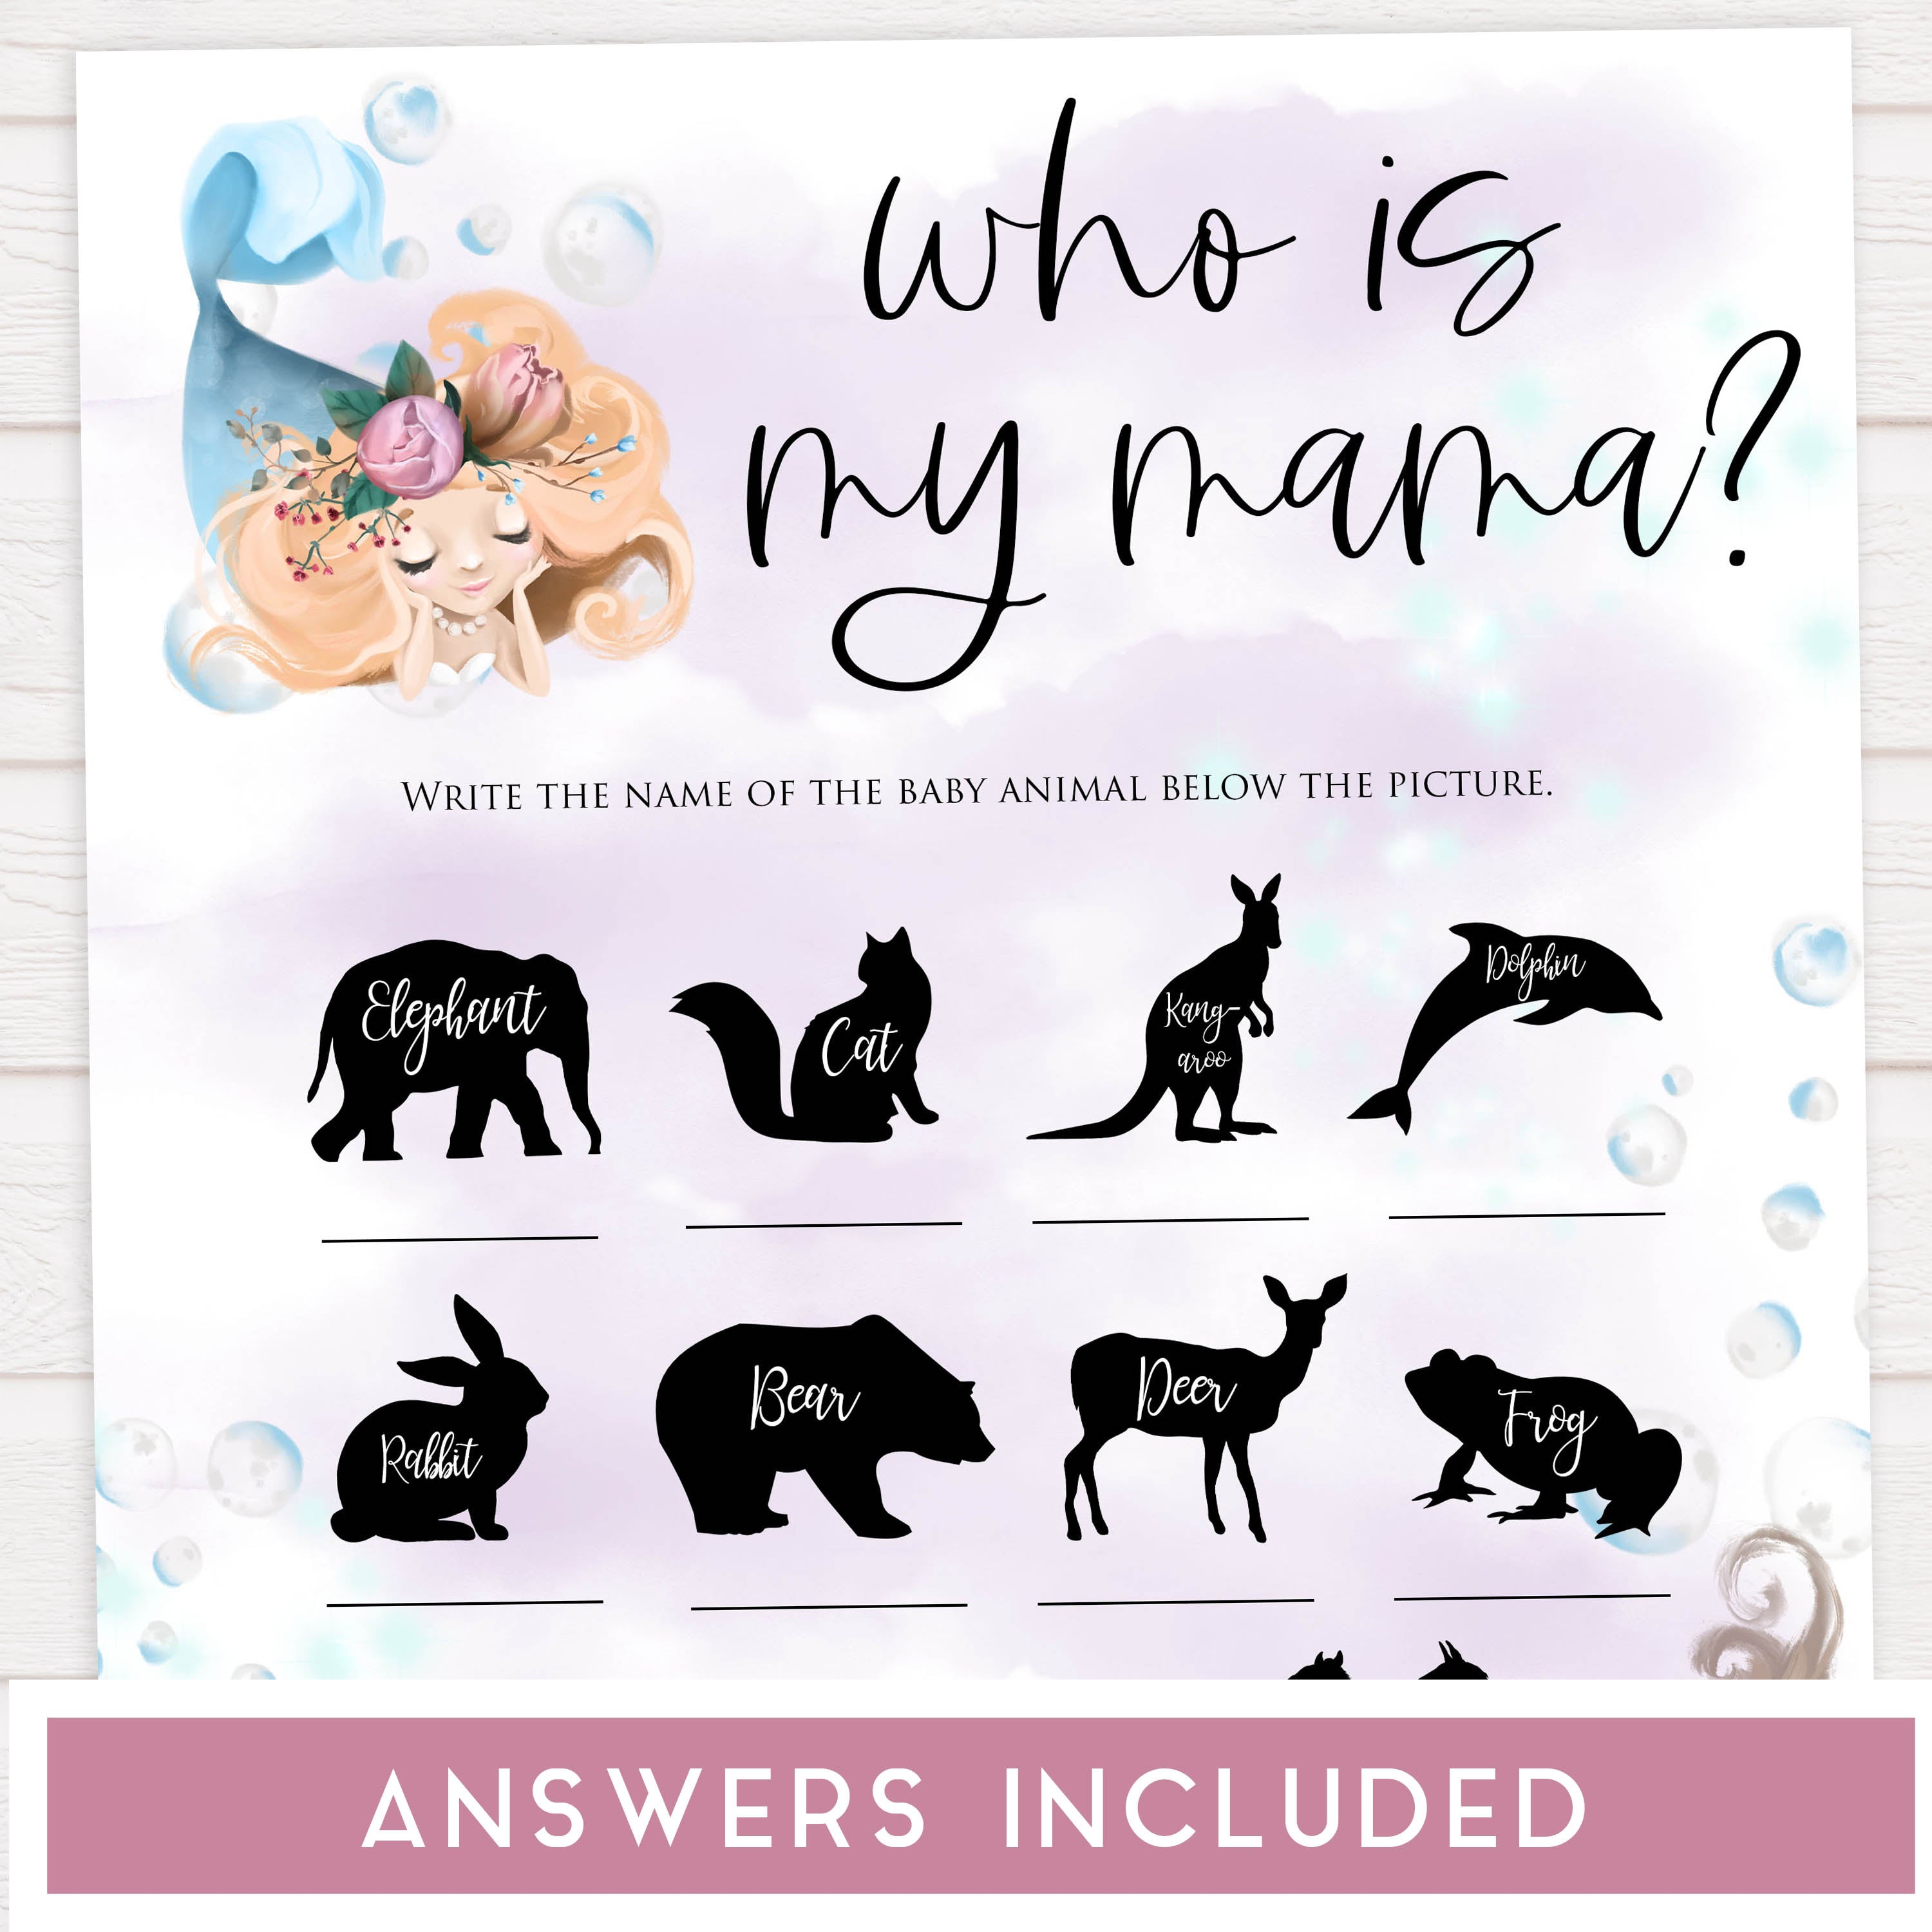 who is my mama baby shower game, Printable baby shower games, little mermaid baby games, baby shower games, fun baby shower ideas, top baby shower ideas, little mermaid baby shower, baby shower games, pink hearts baby shower ideas